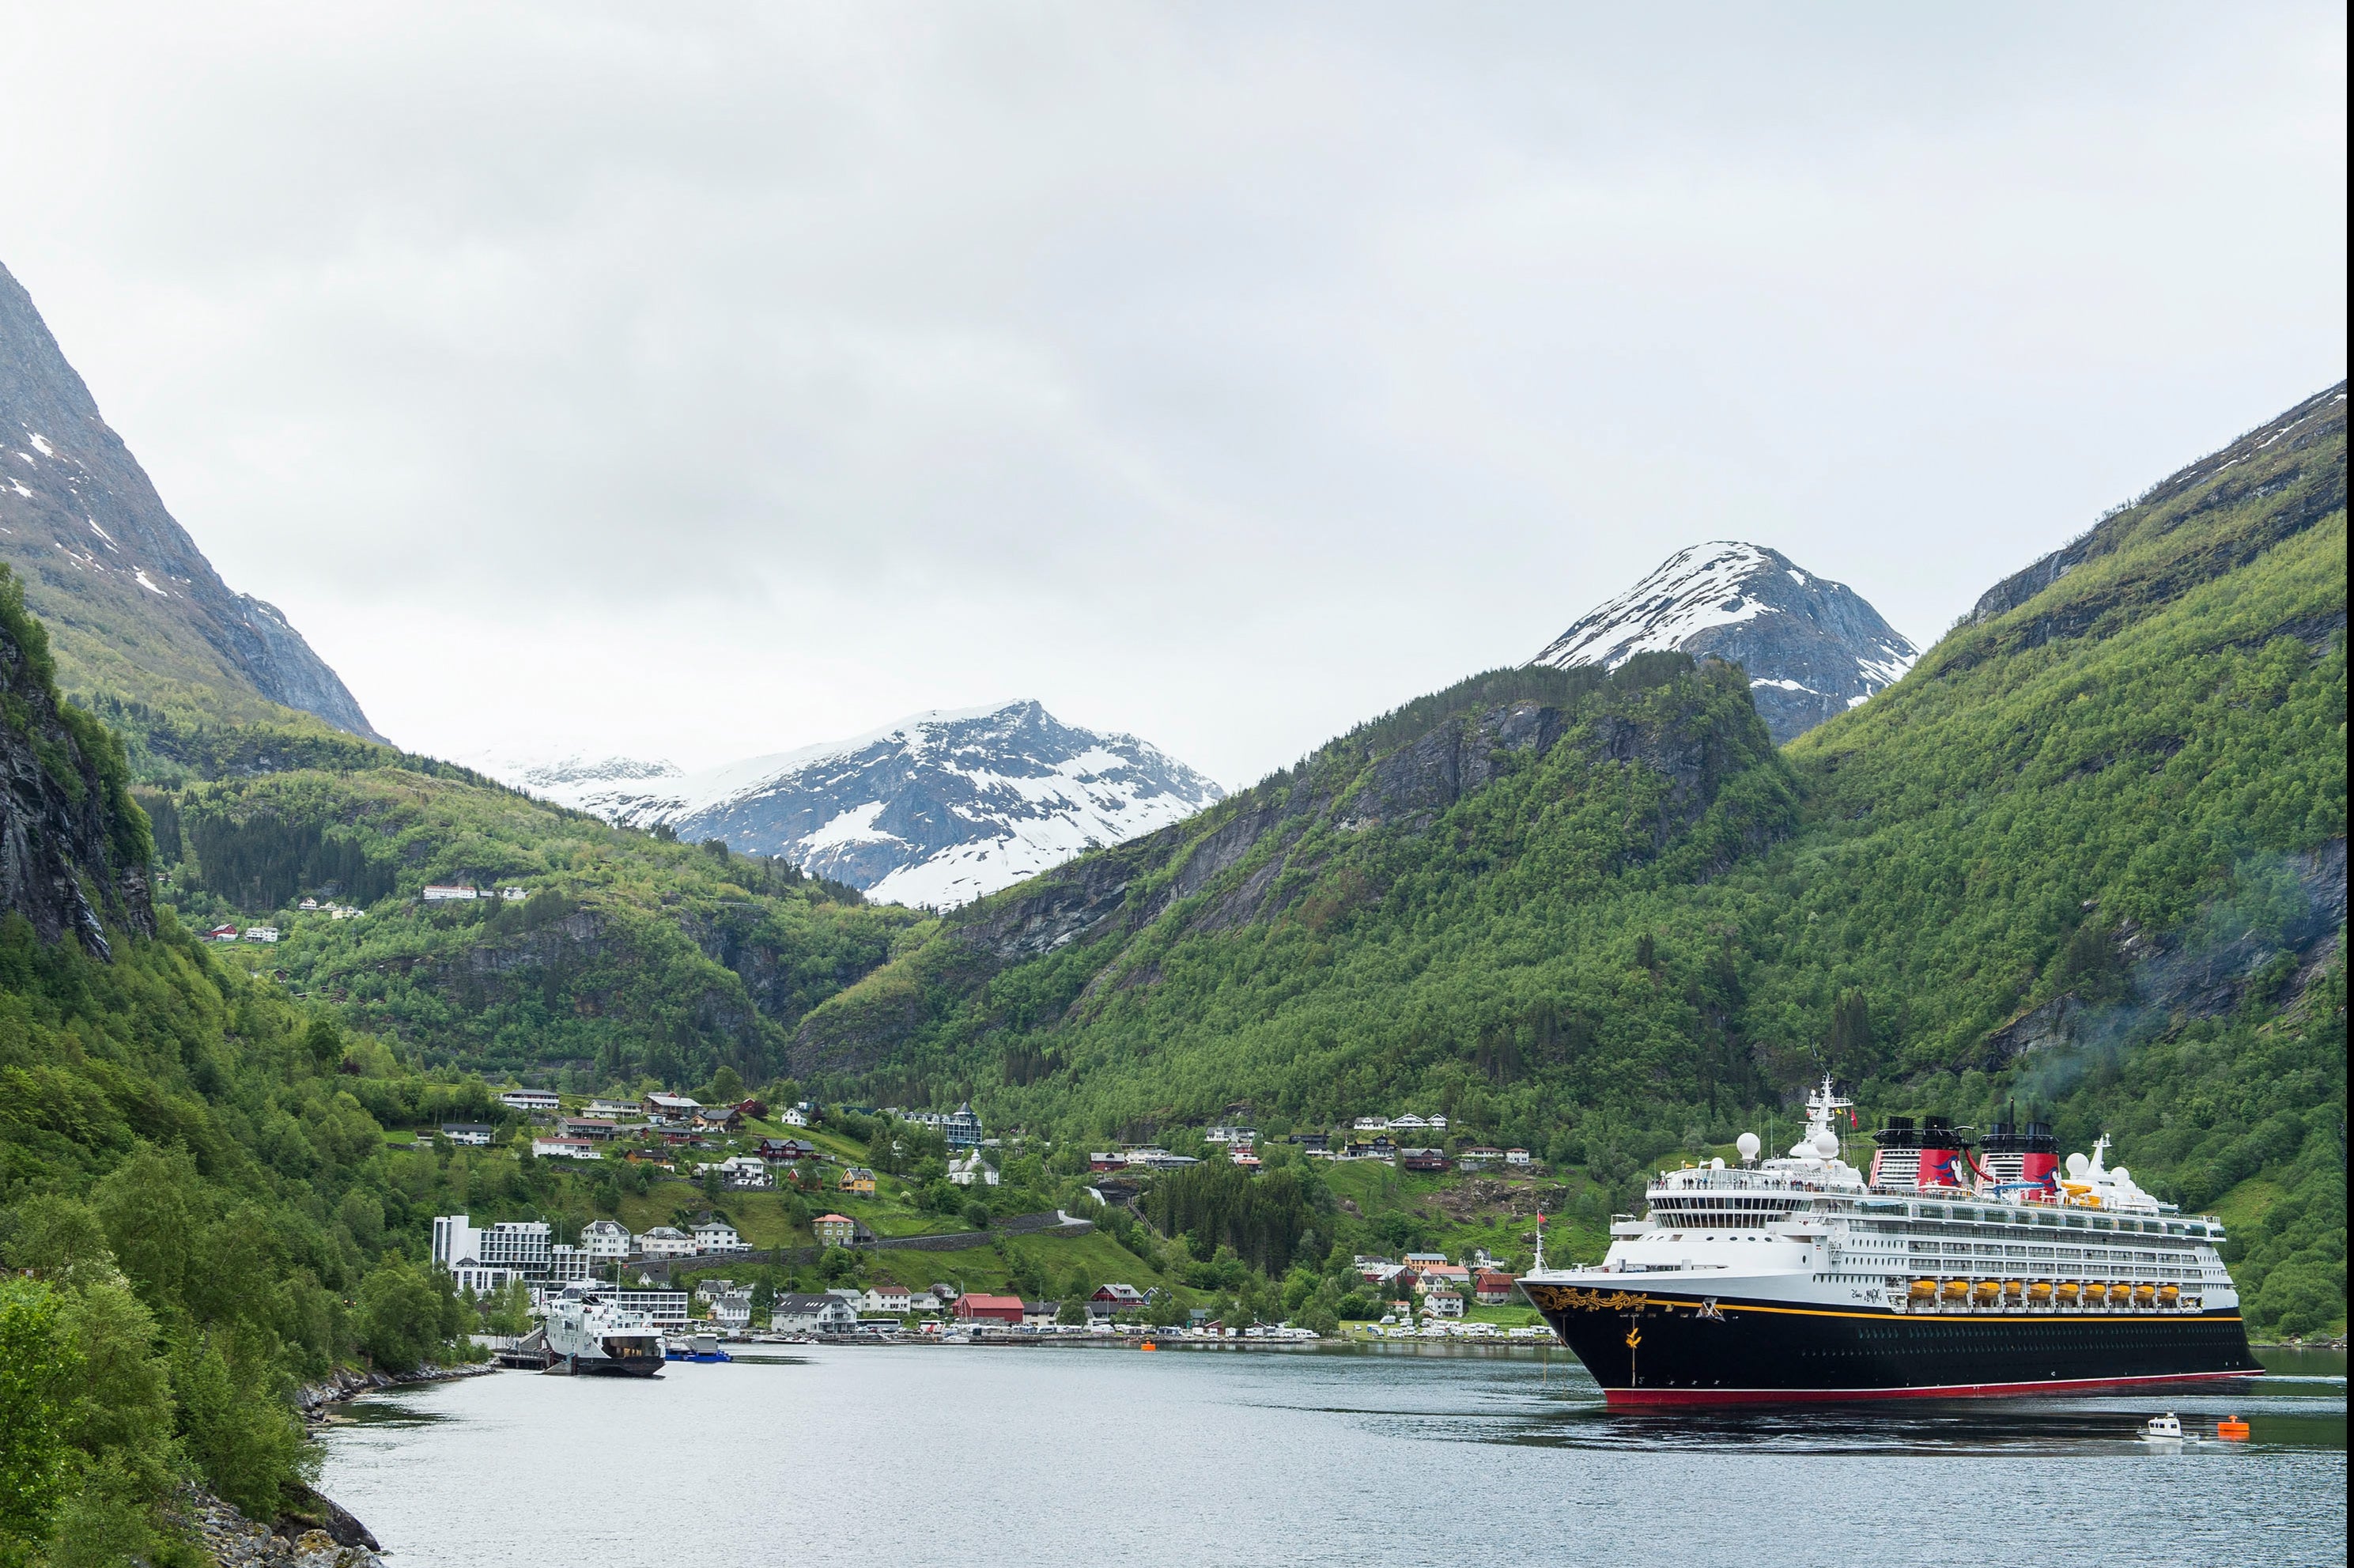 Lock in a week in the Norwegian fjords for under £600